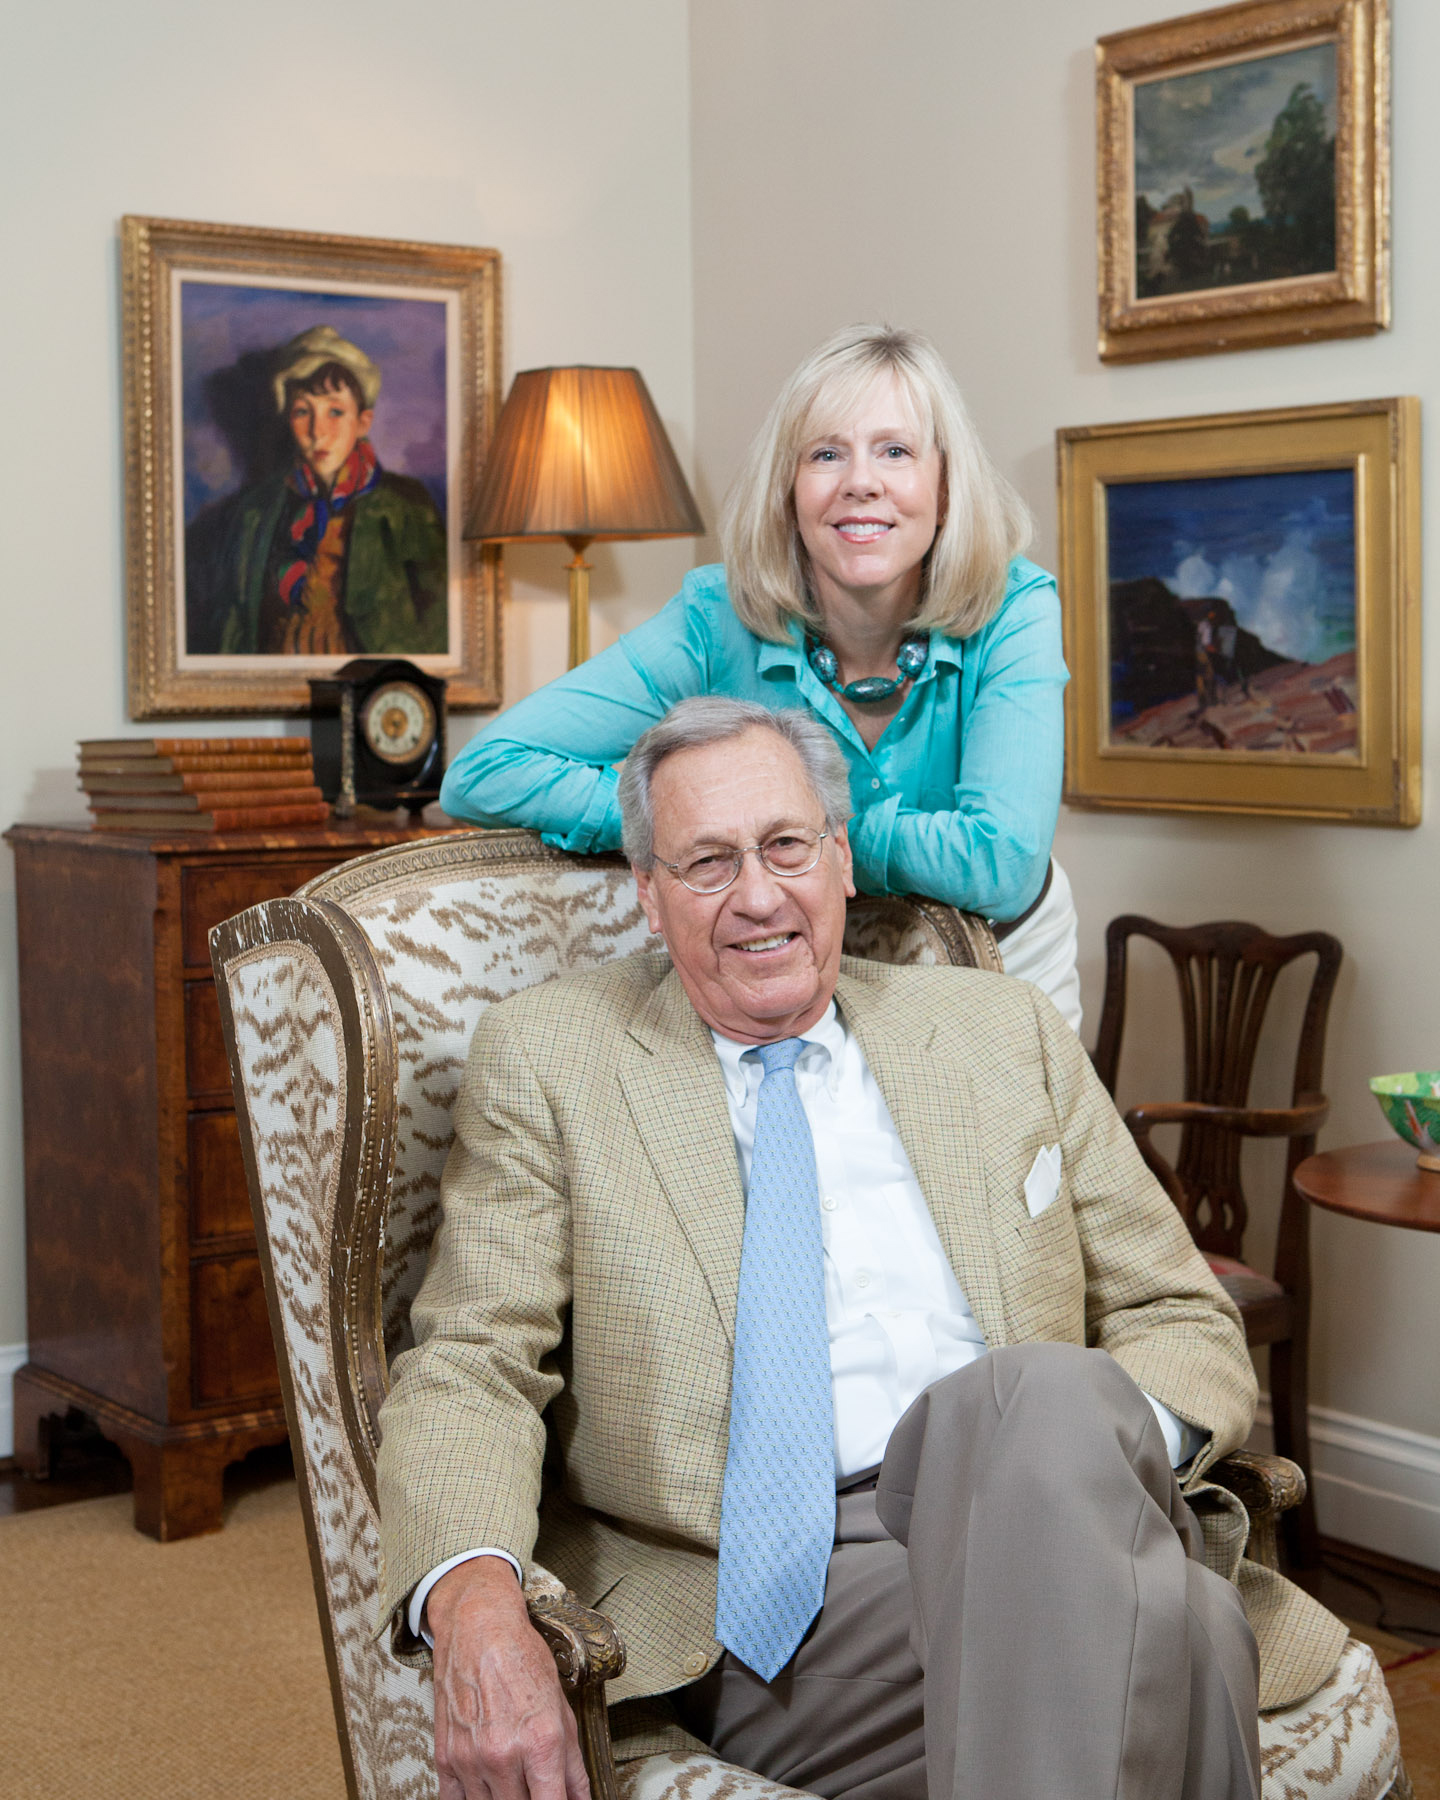 Cynthia and W. Heywood Fralin pose together for a picture